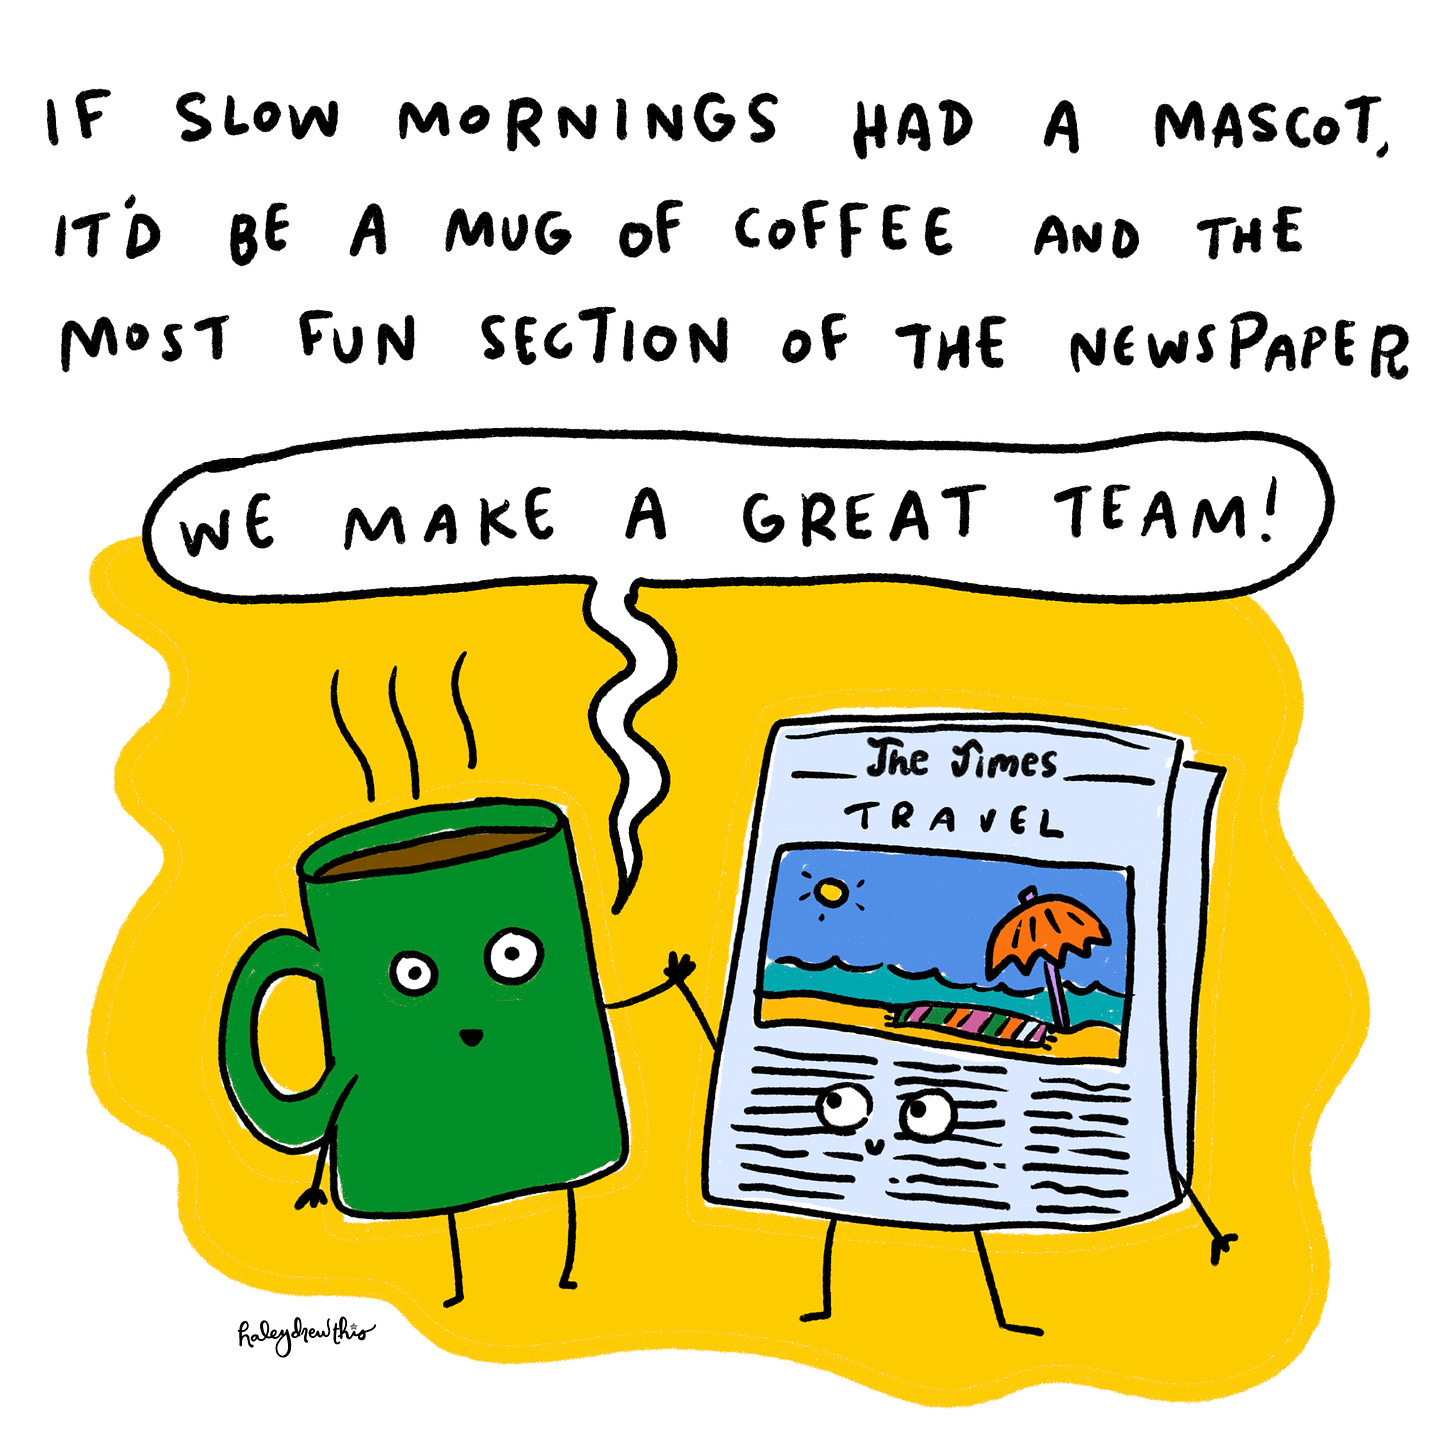 If slow mornings had a mascot, it’d be a mug of coffee paired with the most fun section of the newspaper.